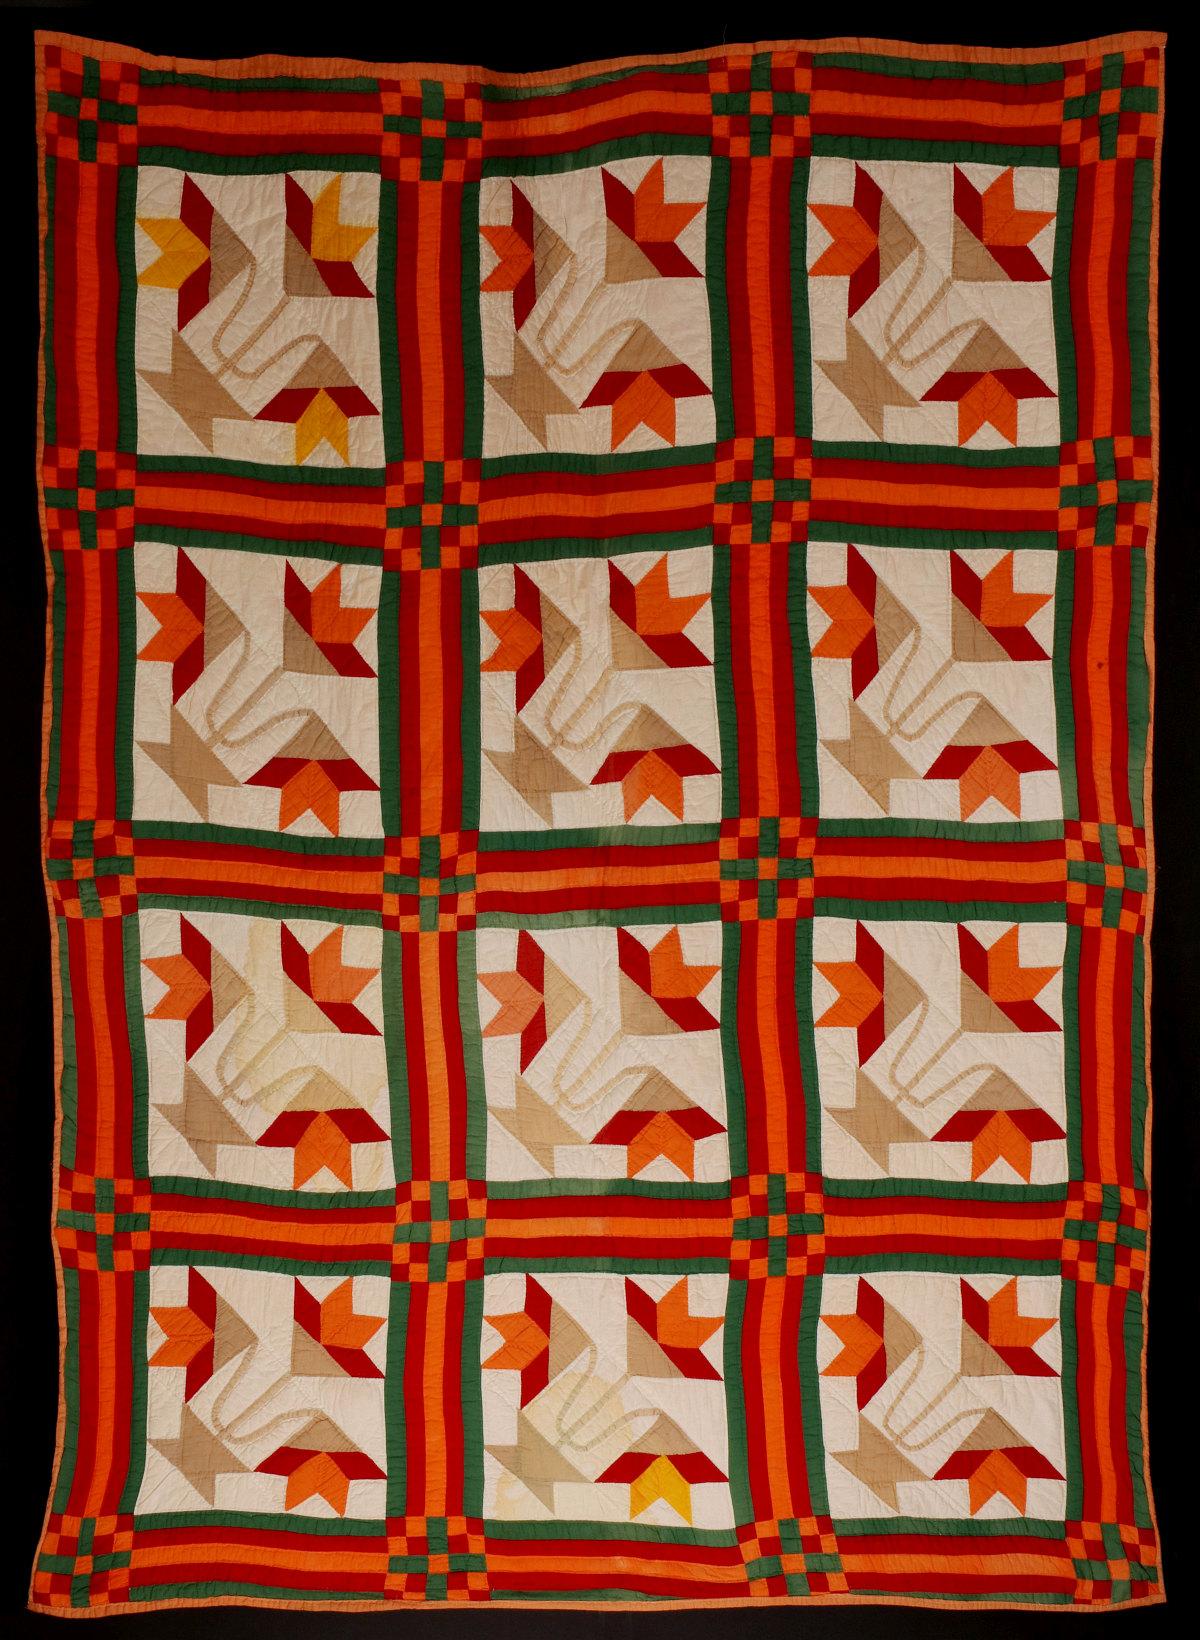 AN AMISH MANNER 'BASKET OF LILIES' HAND STITCHED QUILT